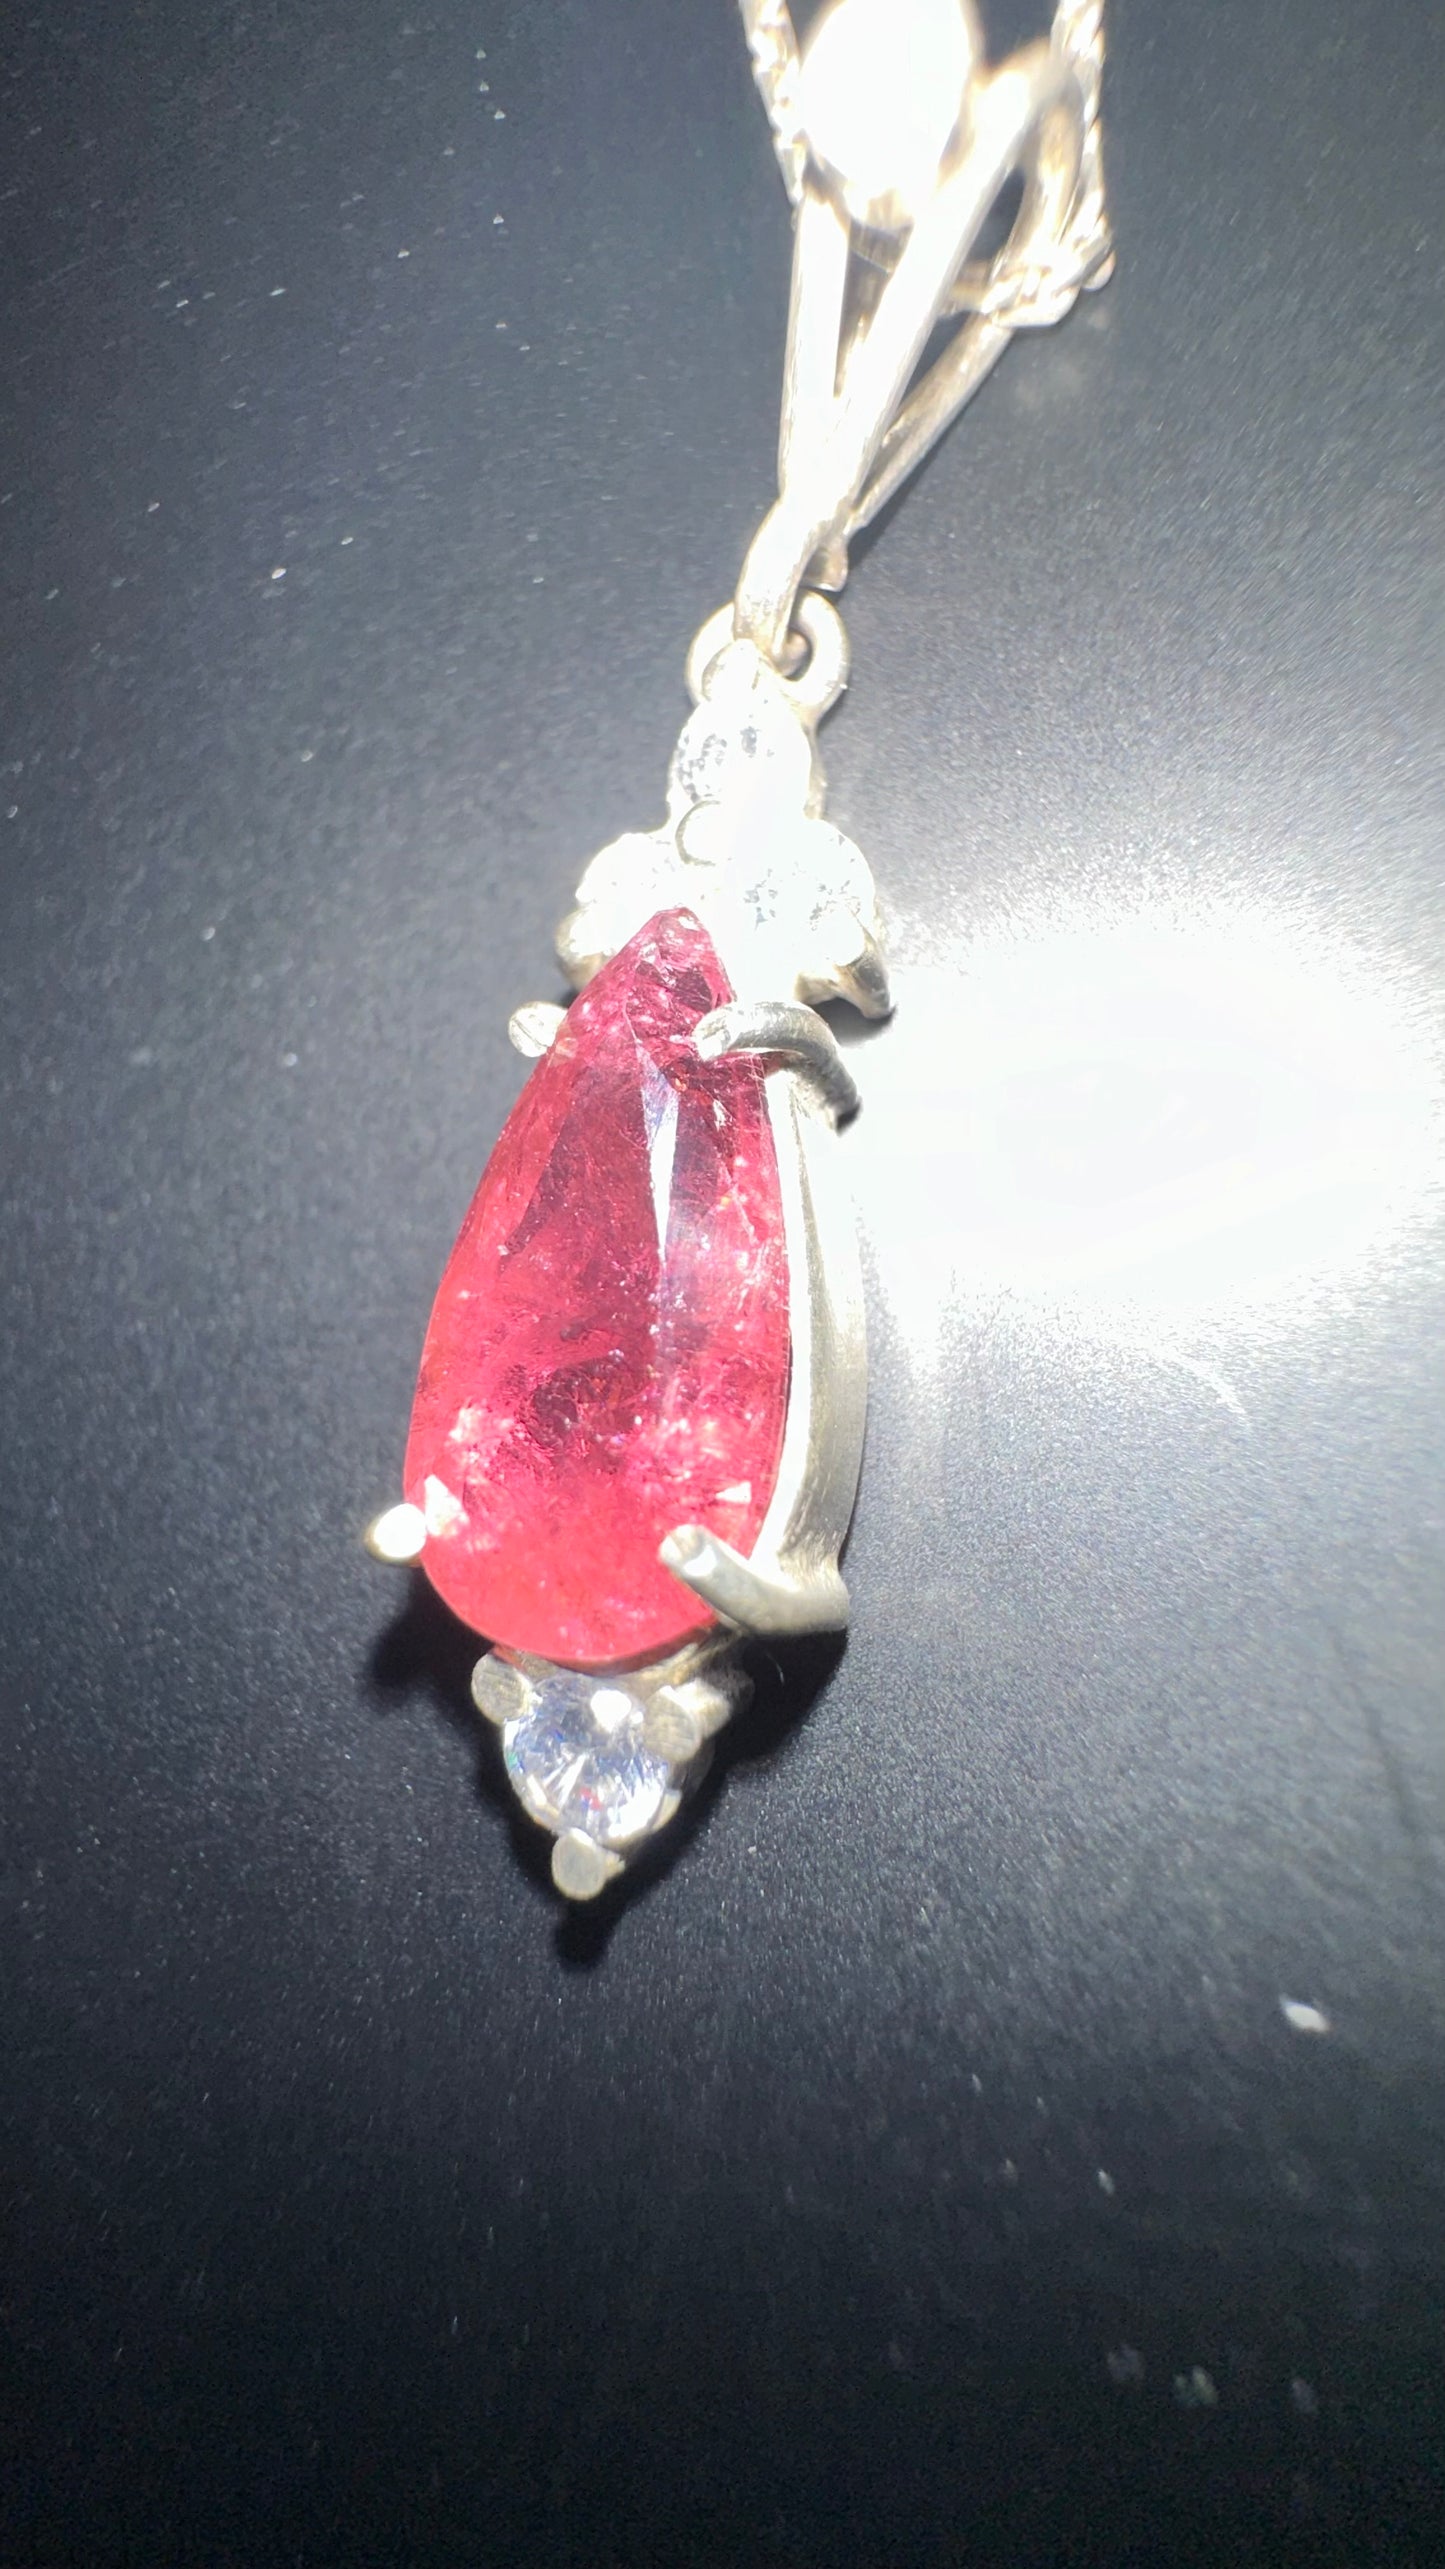 Silver sterling pendent with silver chain 100% original stone